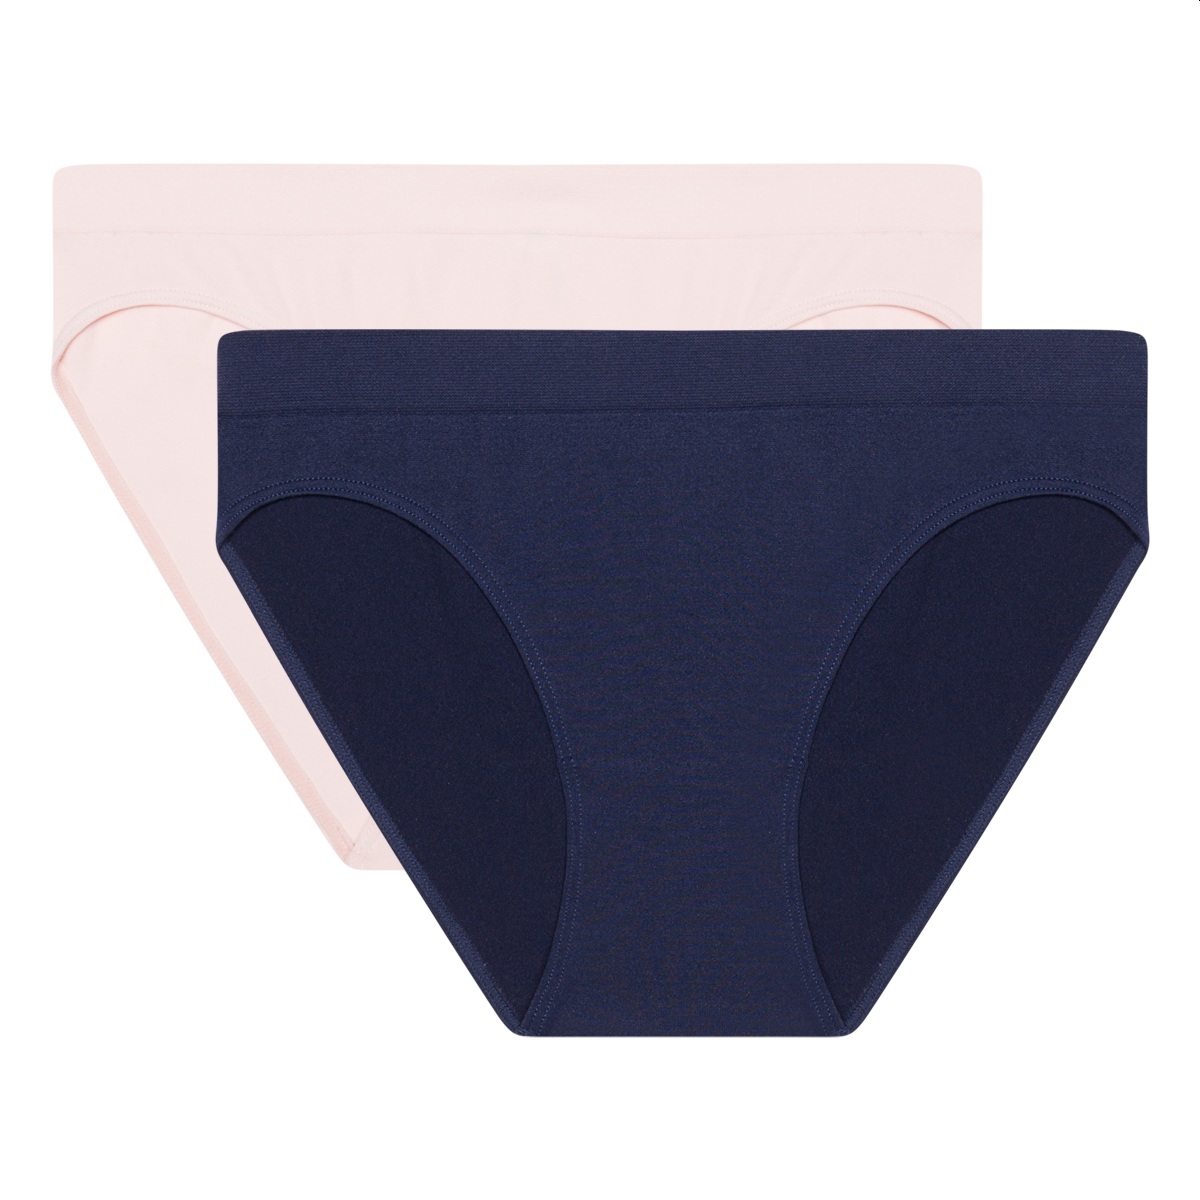 EcoDim Les Pockets pack of 2 seamless microfibre briefs blue/pink